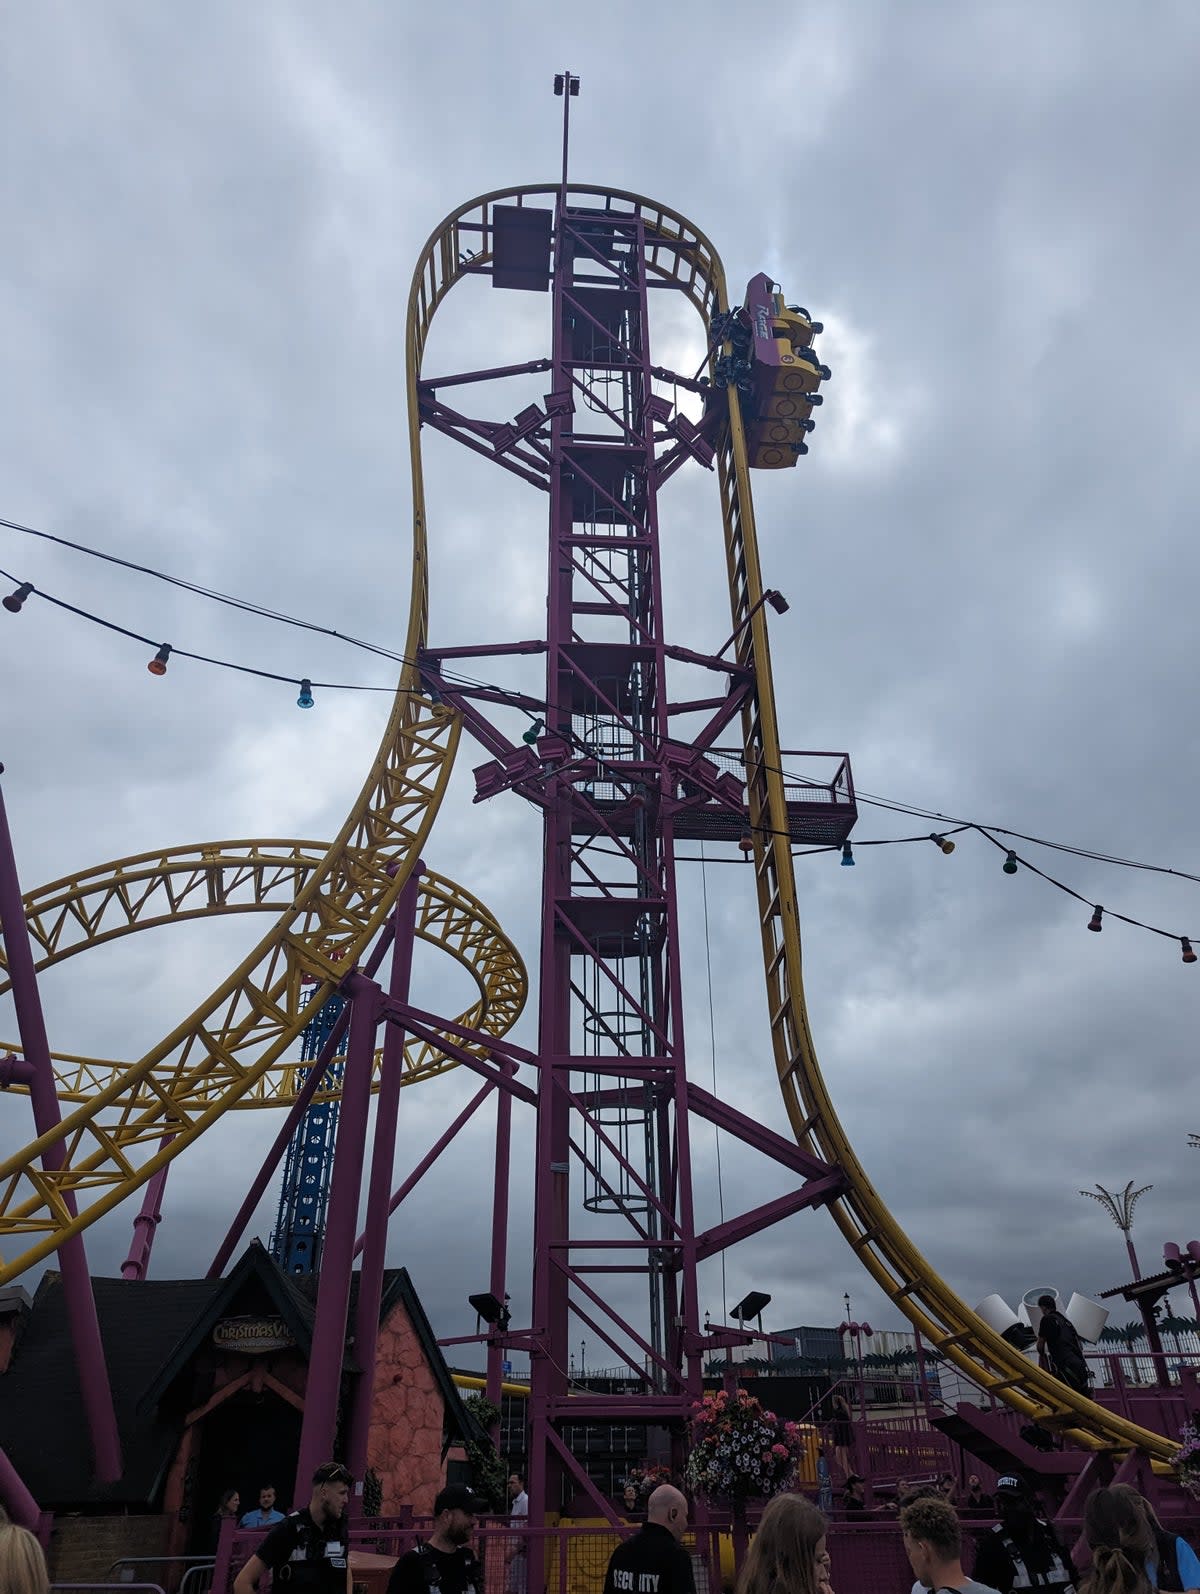 A 72-foot high rollercoaster broke down leaving its riders suspended vertically in the air for up to 40 minutes in Essex on Friday (SWNS)